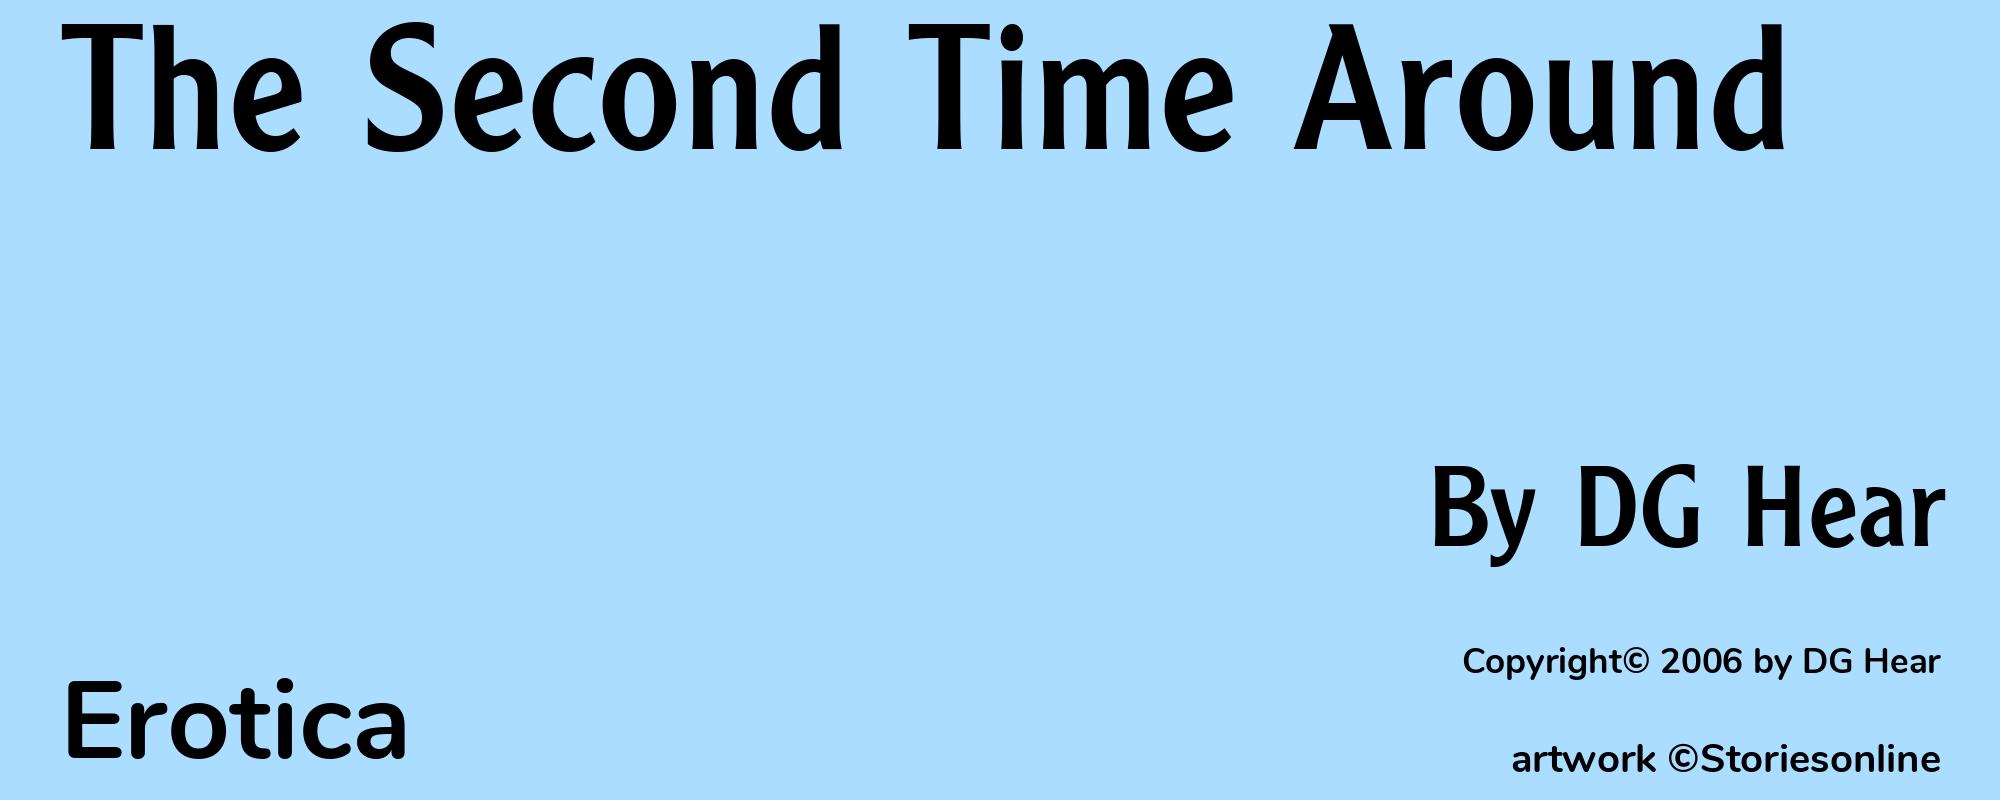 The Second Time Around - Cover